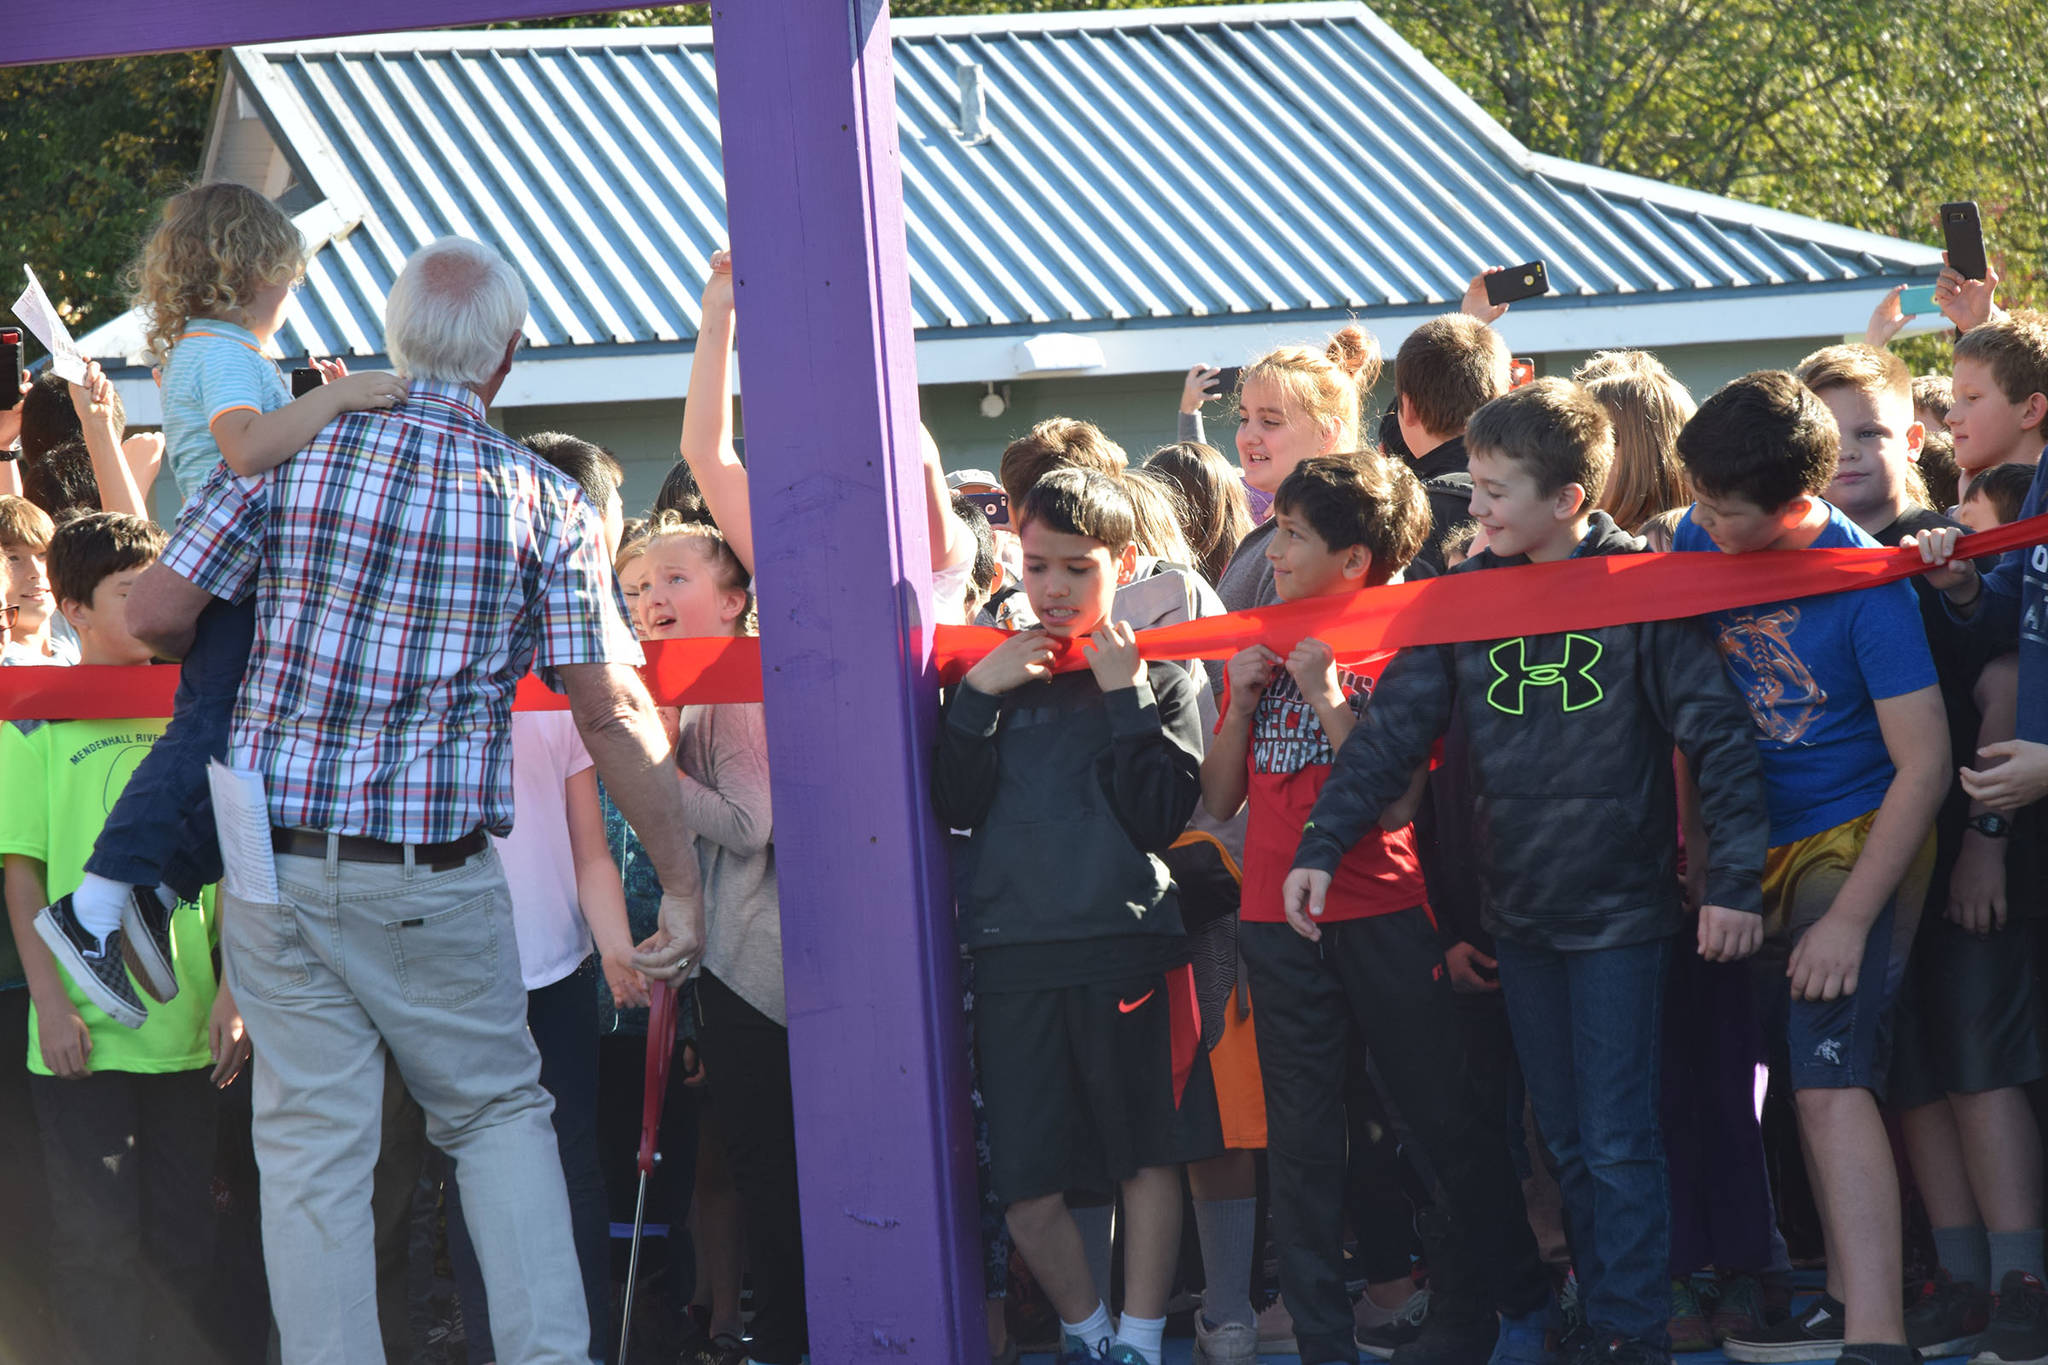 Children wait for Mayor Ken Koelsch to cut a ribbon at the entrance to Project Playground on Saturday at Twin Lakes. (Kevin Gullufsen | Juneau Empire)